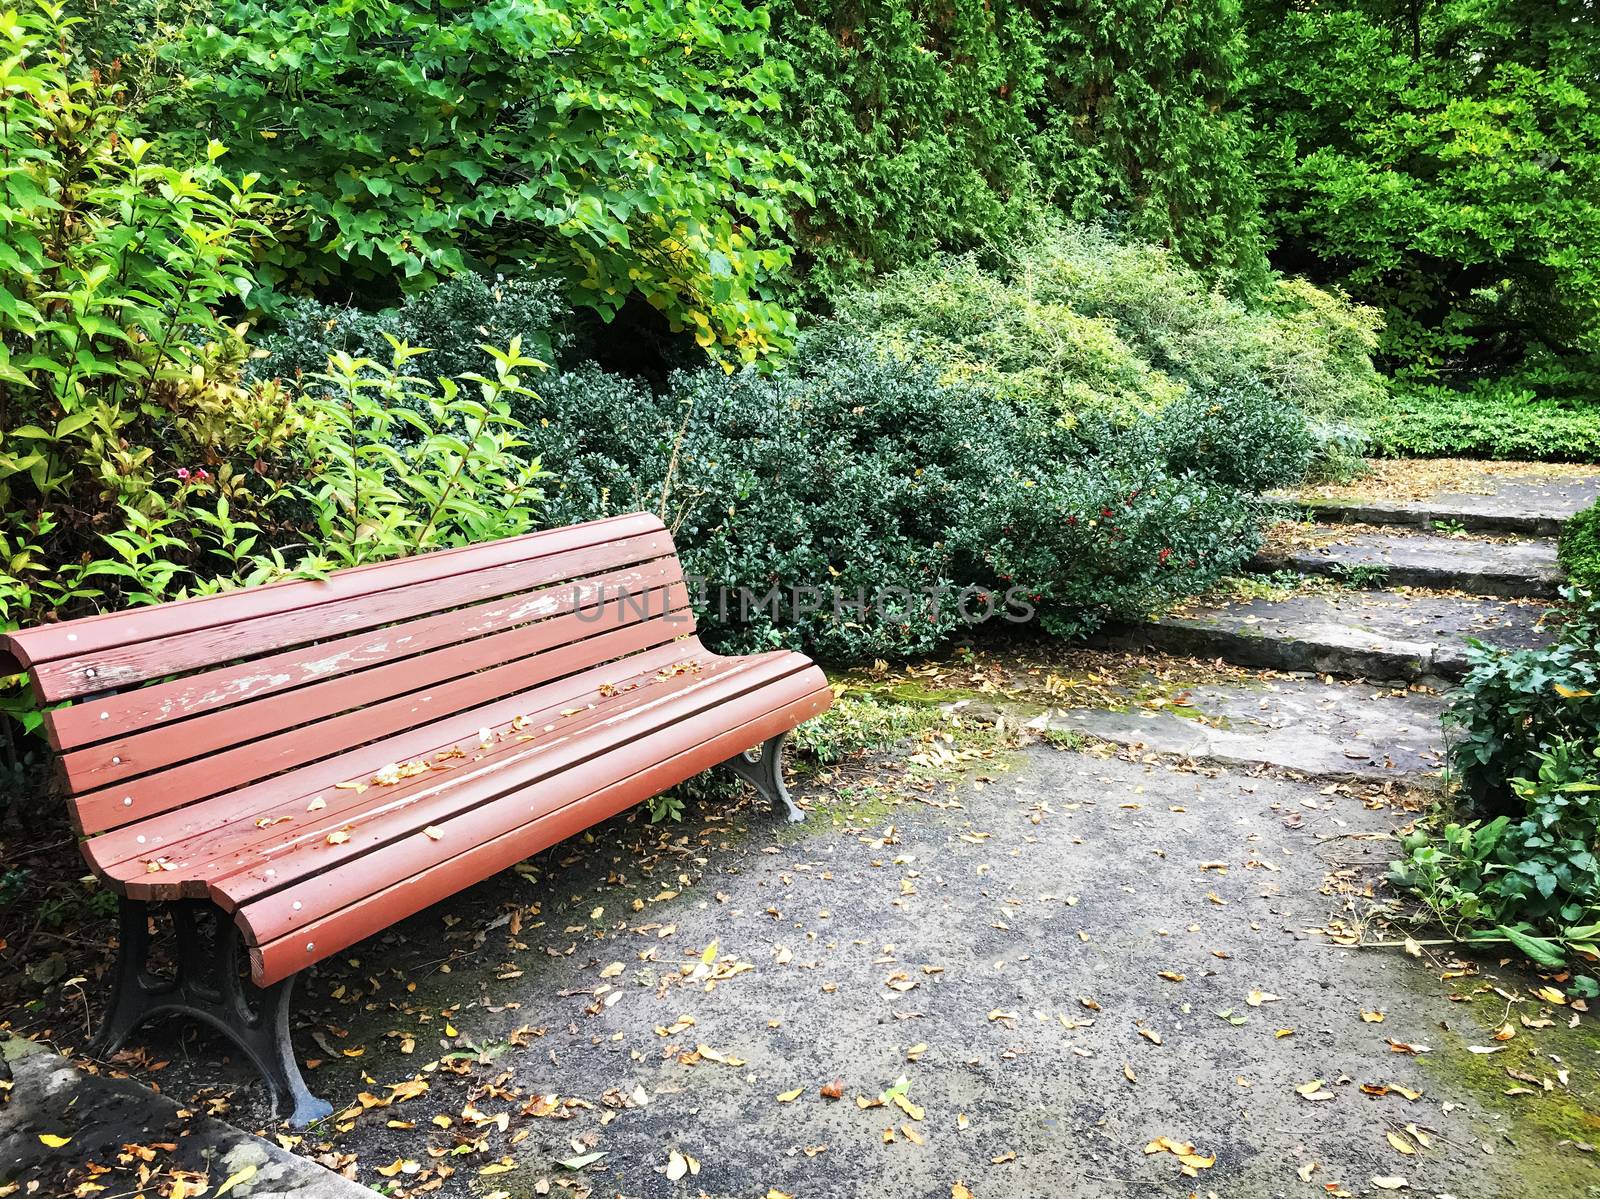 Wooden bench in a peaceful garden in early autumn.